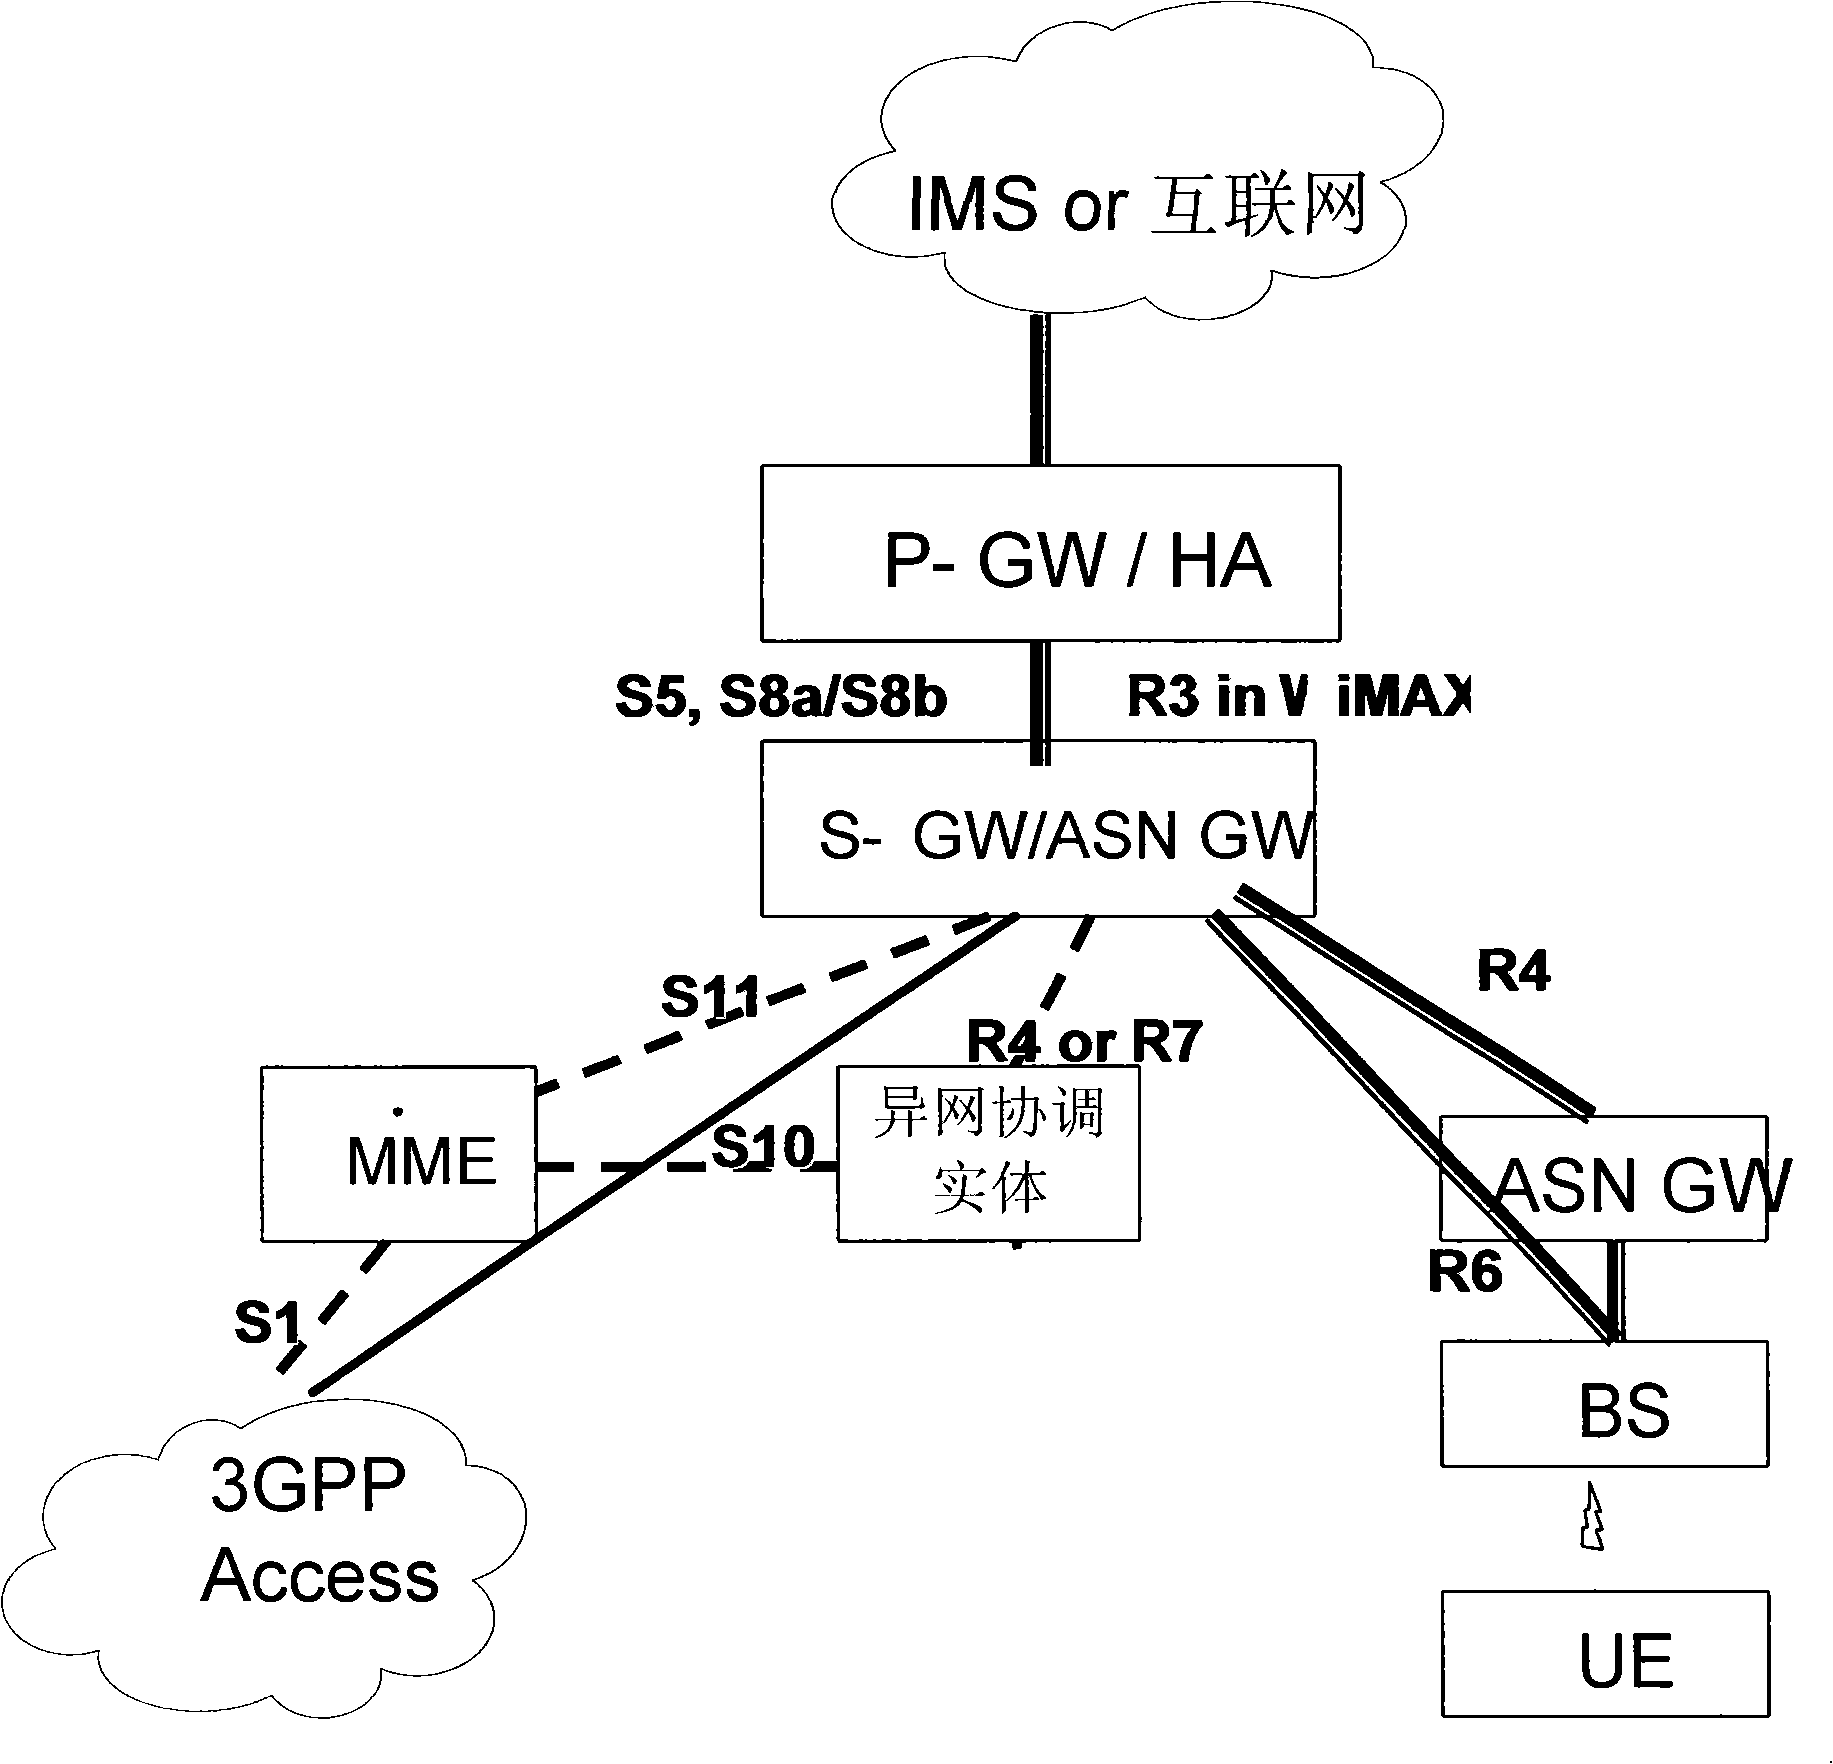 Apparatus for coordinating guiding network, wireless network as well as method for switching and attaching user equipment